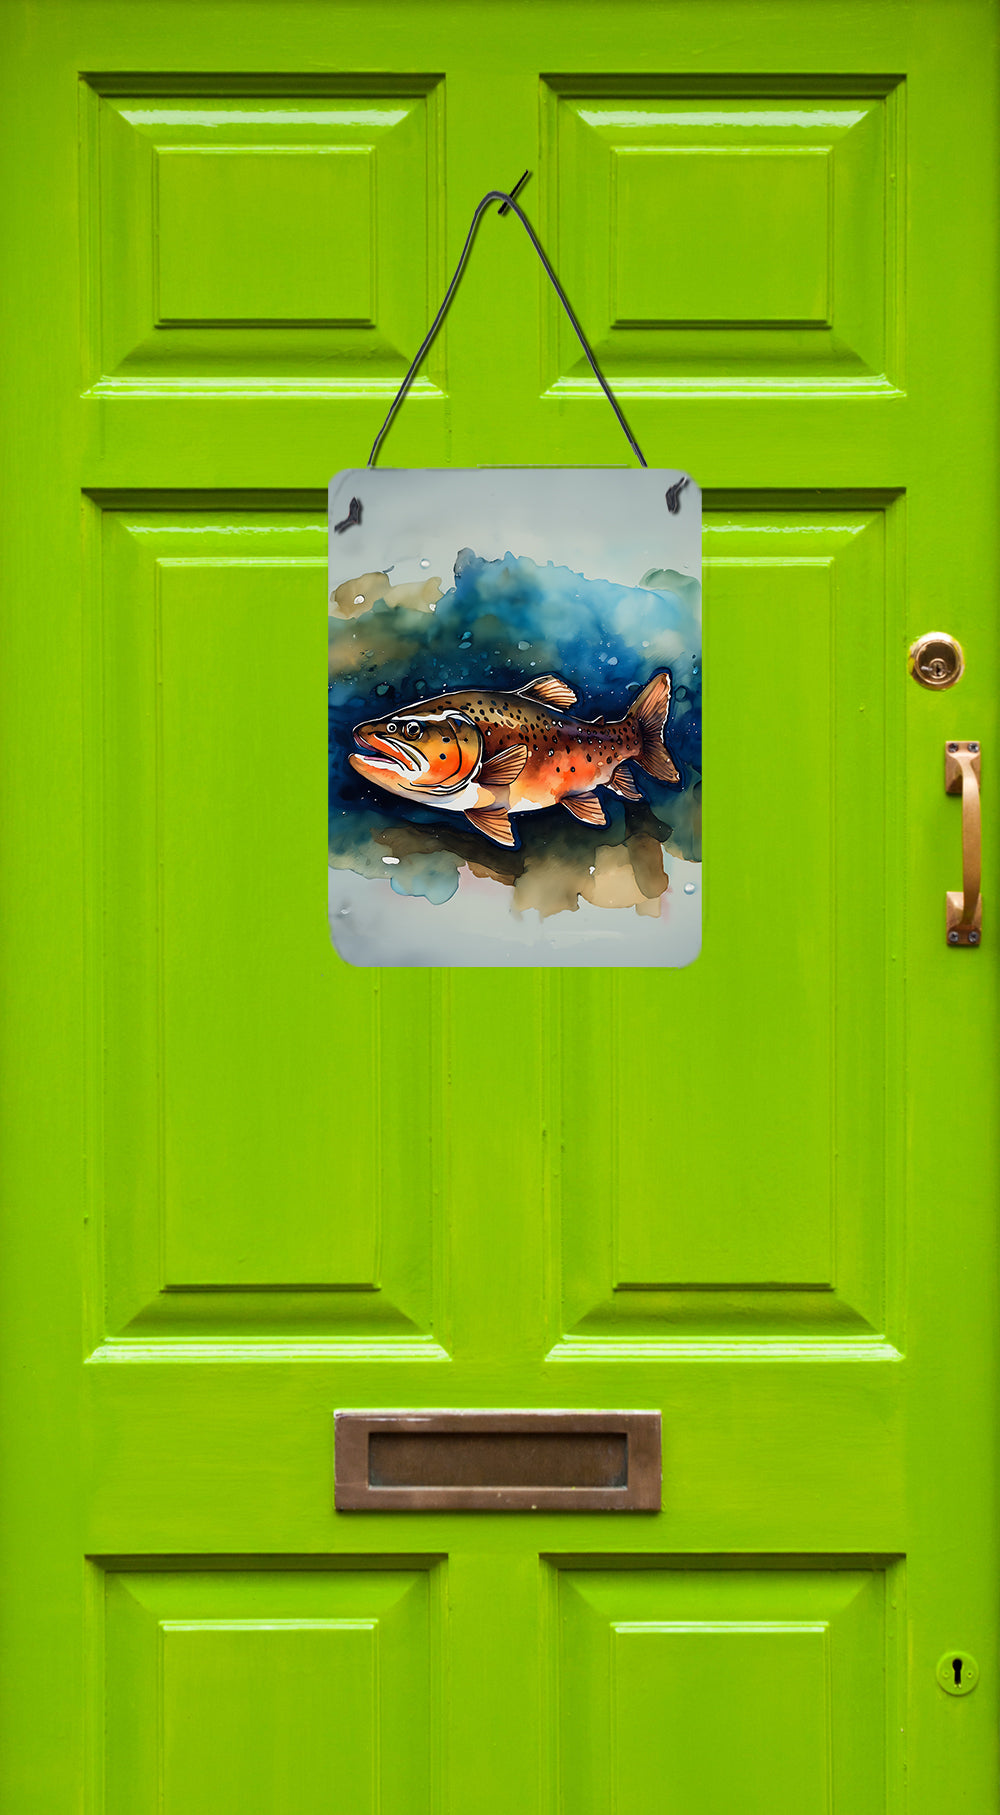 Buy this Brown Trout Wall or Door Hanging Prints